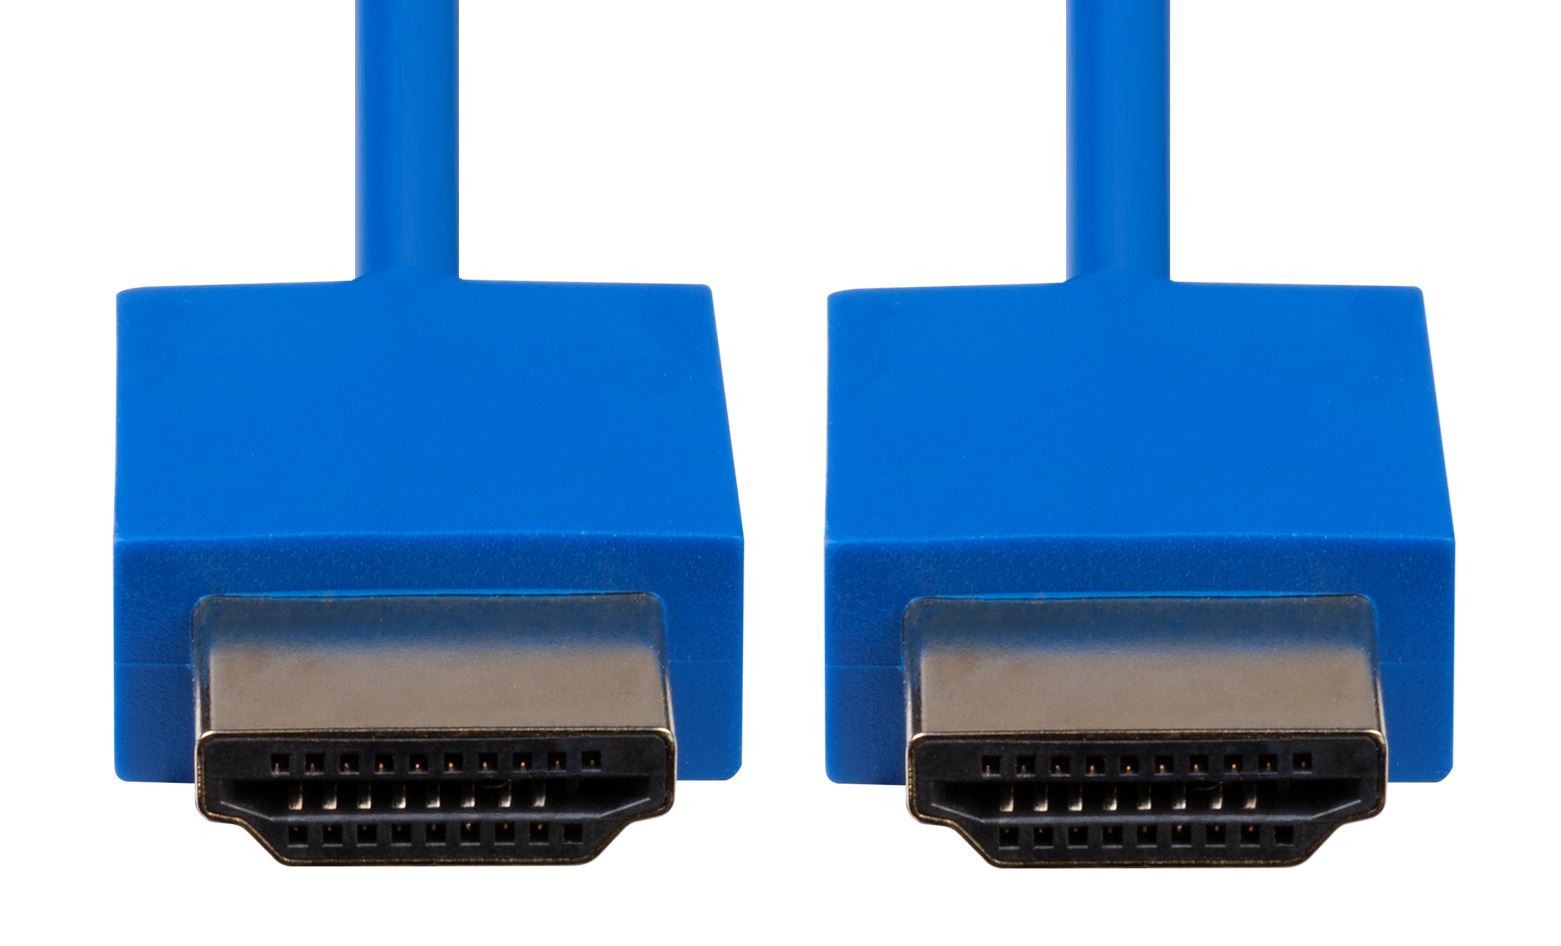 DYNAMIX_2M_HDMI_BLUE_Nano_High_Speed_With_Ethernet_Cable._Designed_for_UHD_Display_up_to_4K2K@60Hz._Slimline_Robust_Cable._Supports_CEC_2.0,_3D,_&_ARC._Supports_Up_to_32_Audio_Channels. 697